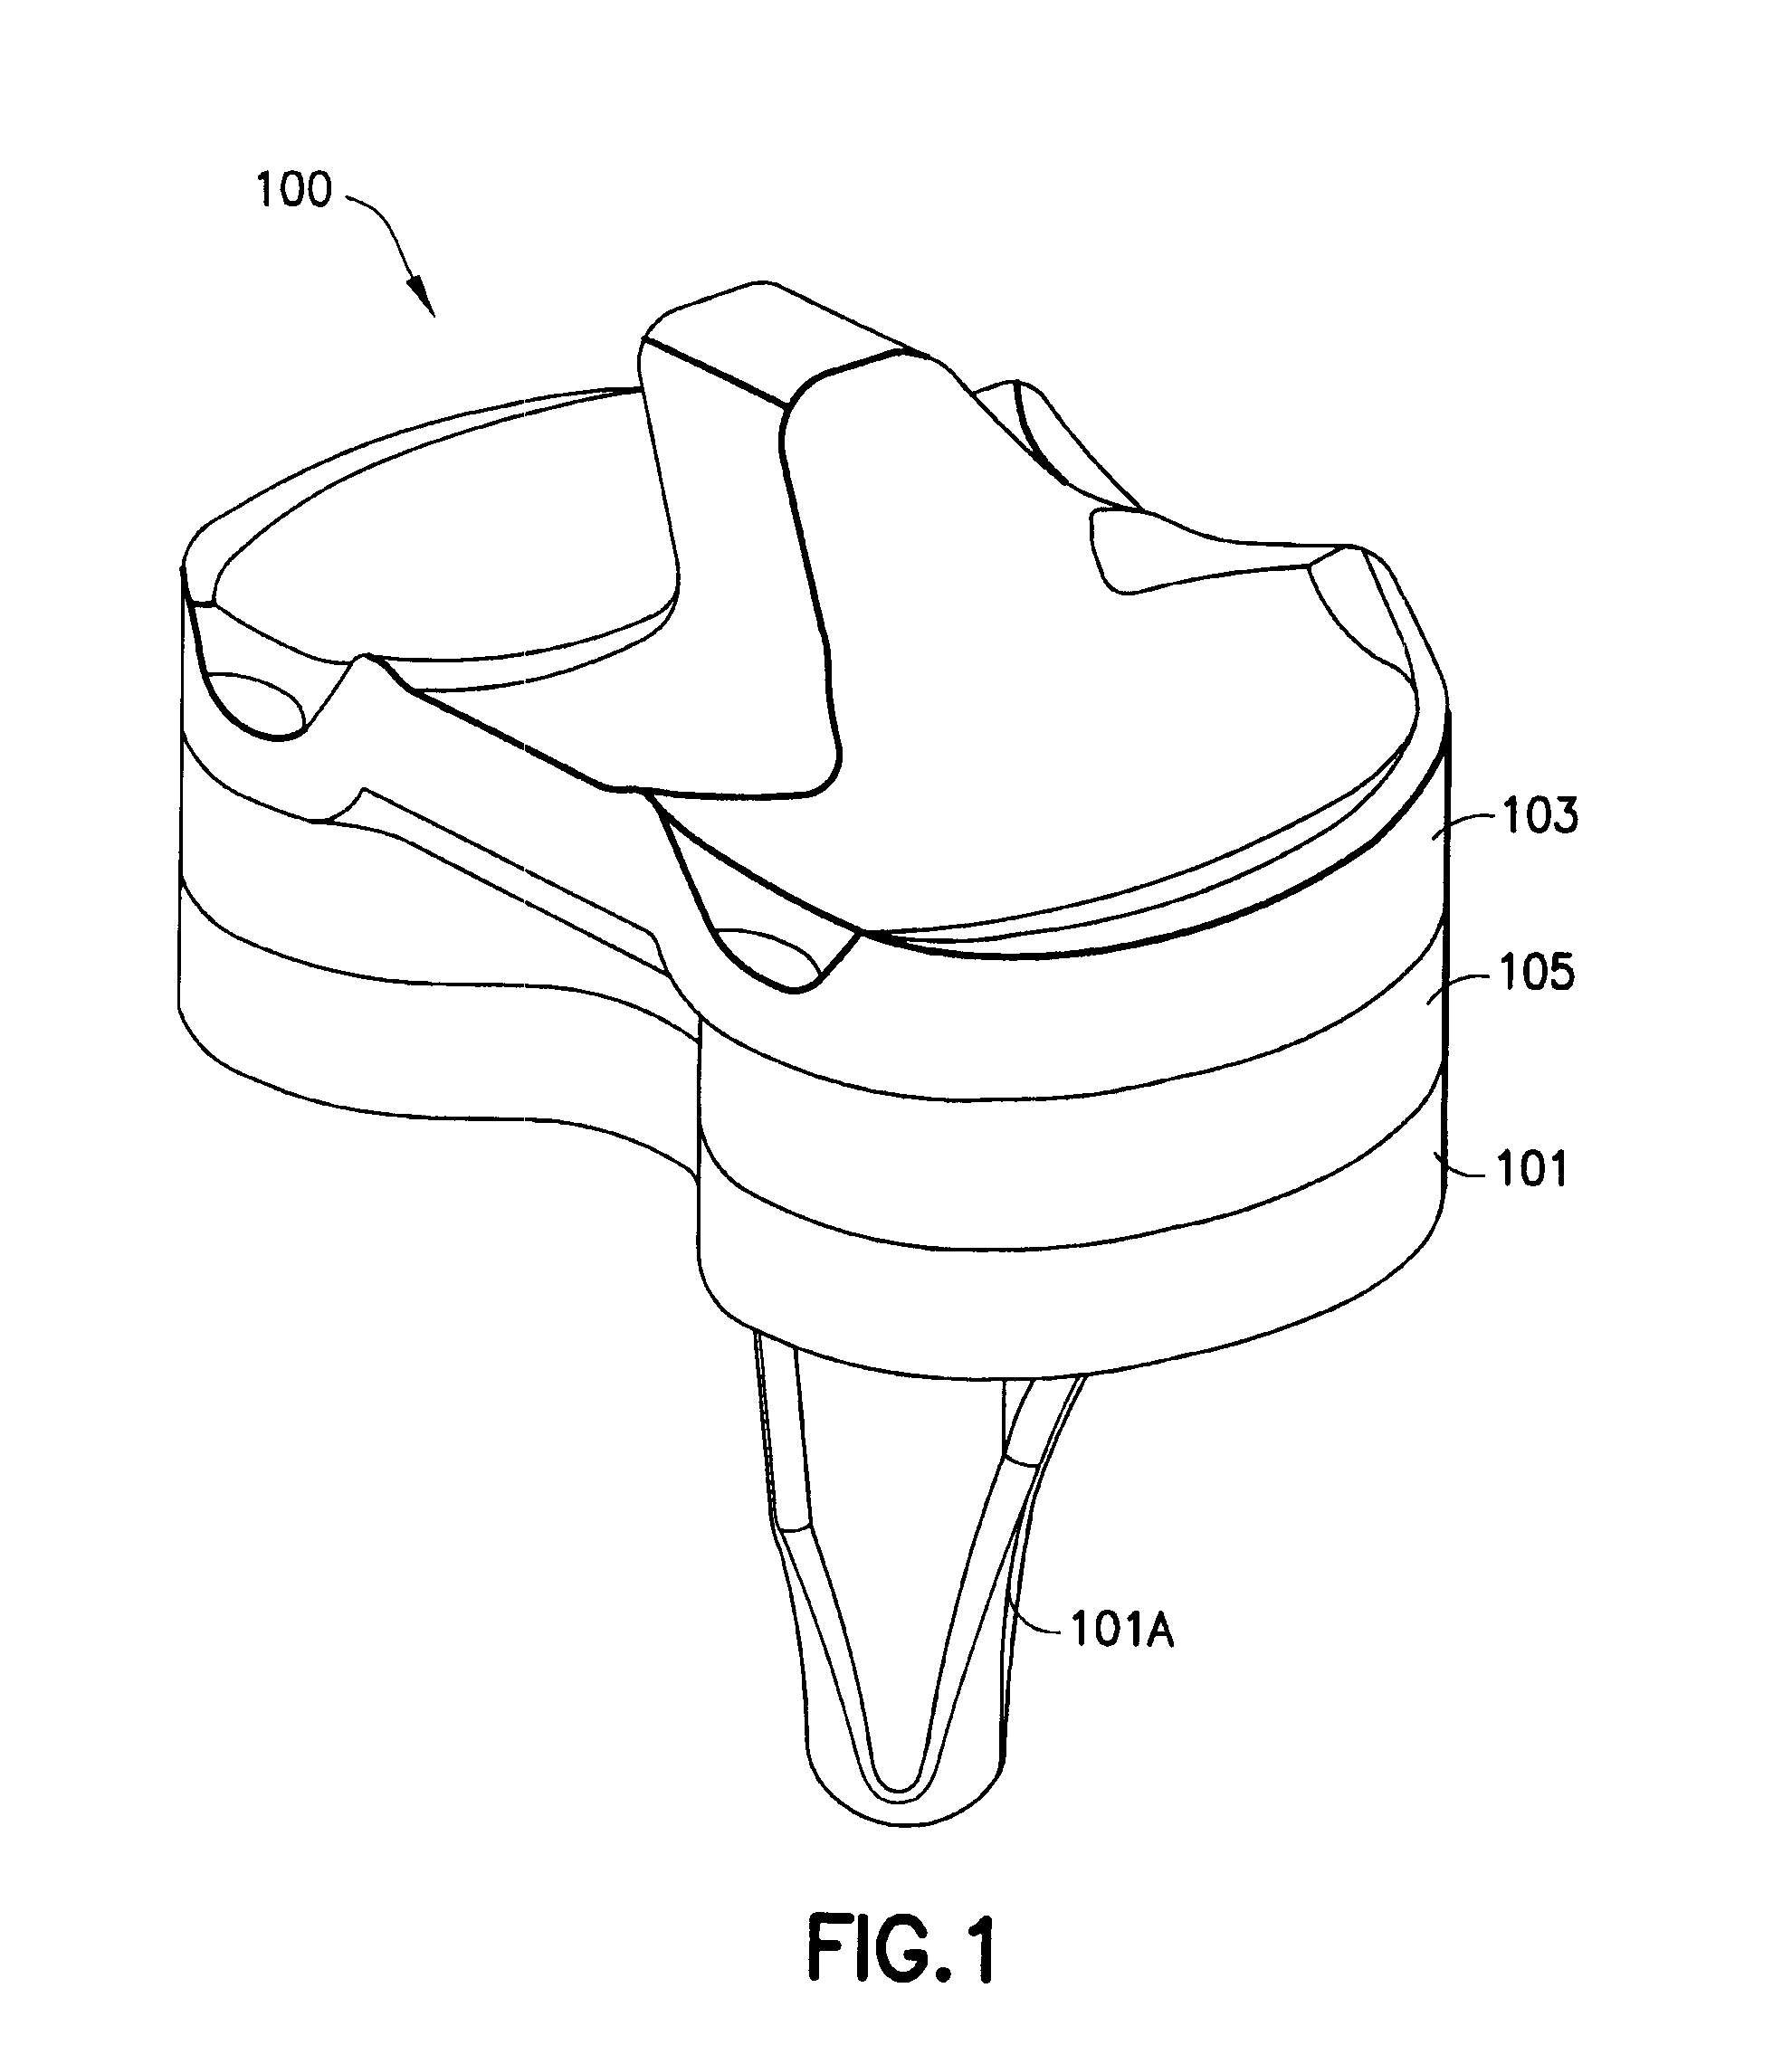 System and method for adjusting the thickness of a prosthesis